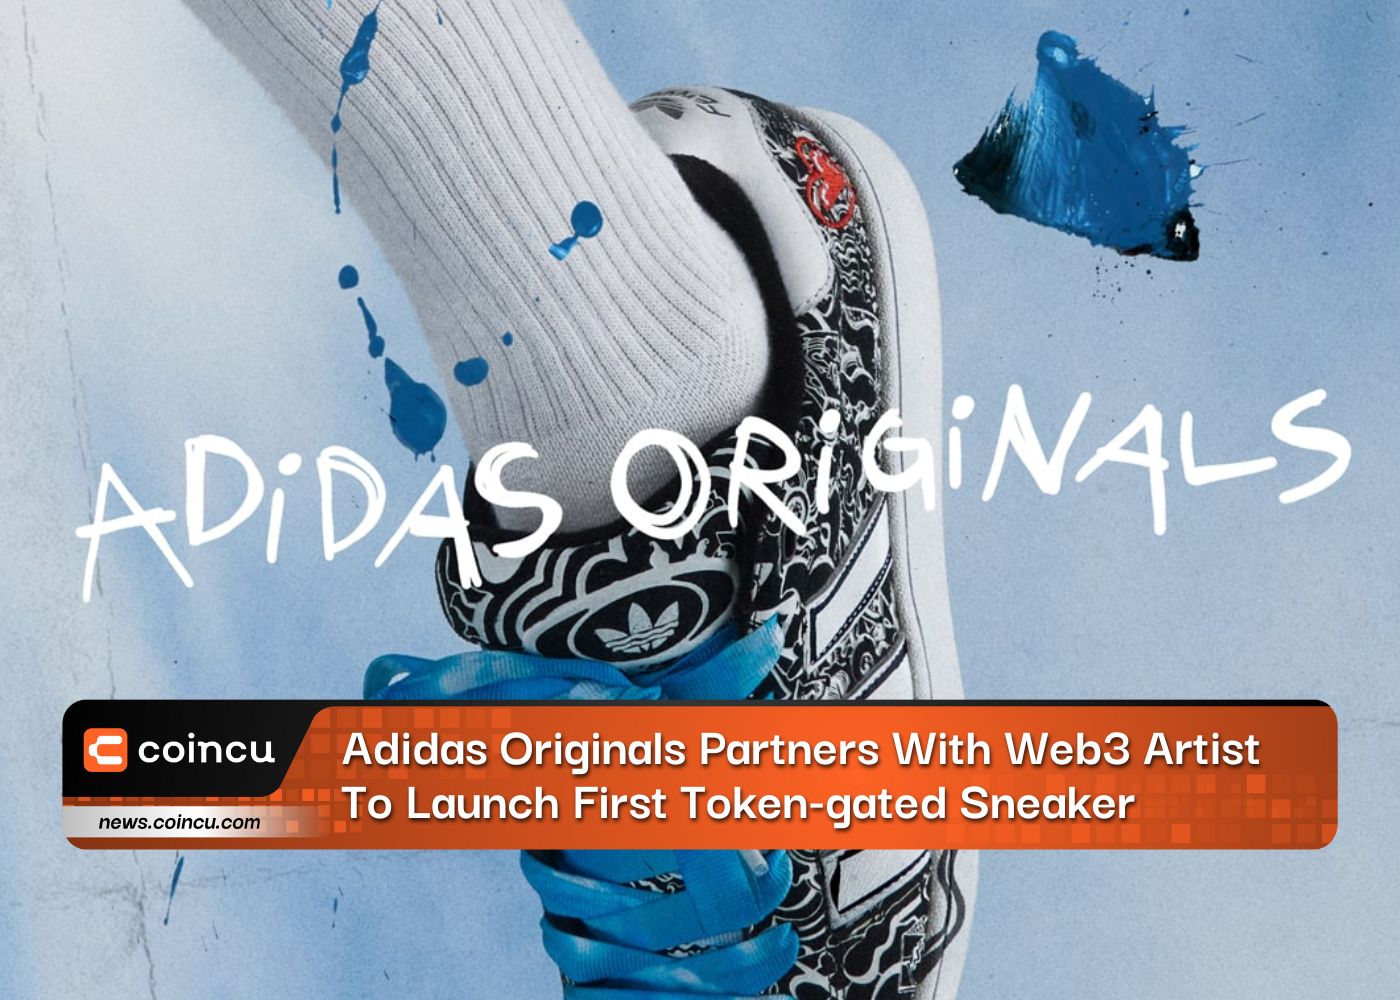 Adidas Originals Partners With Web3 Artist To Launch First Token-gated Sneaker